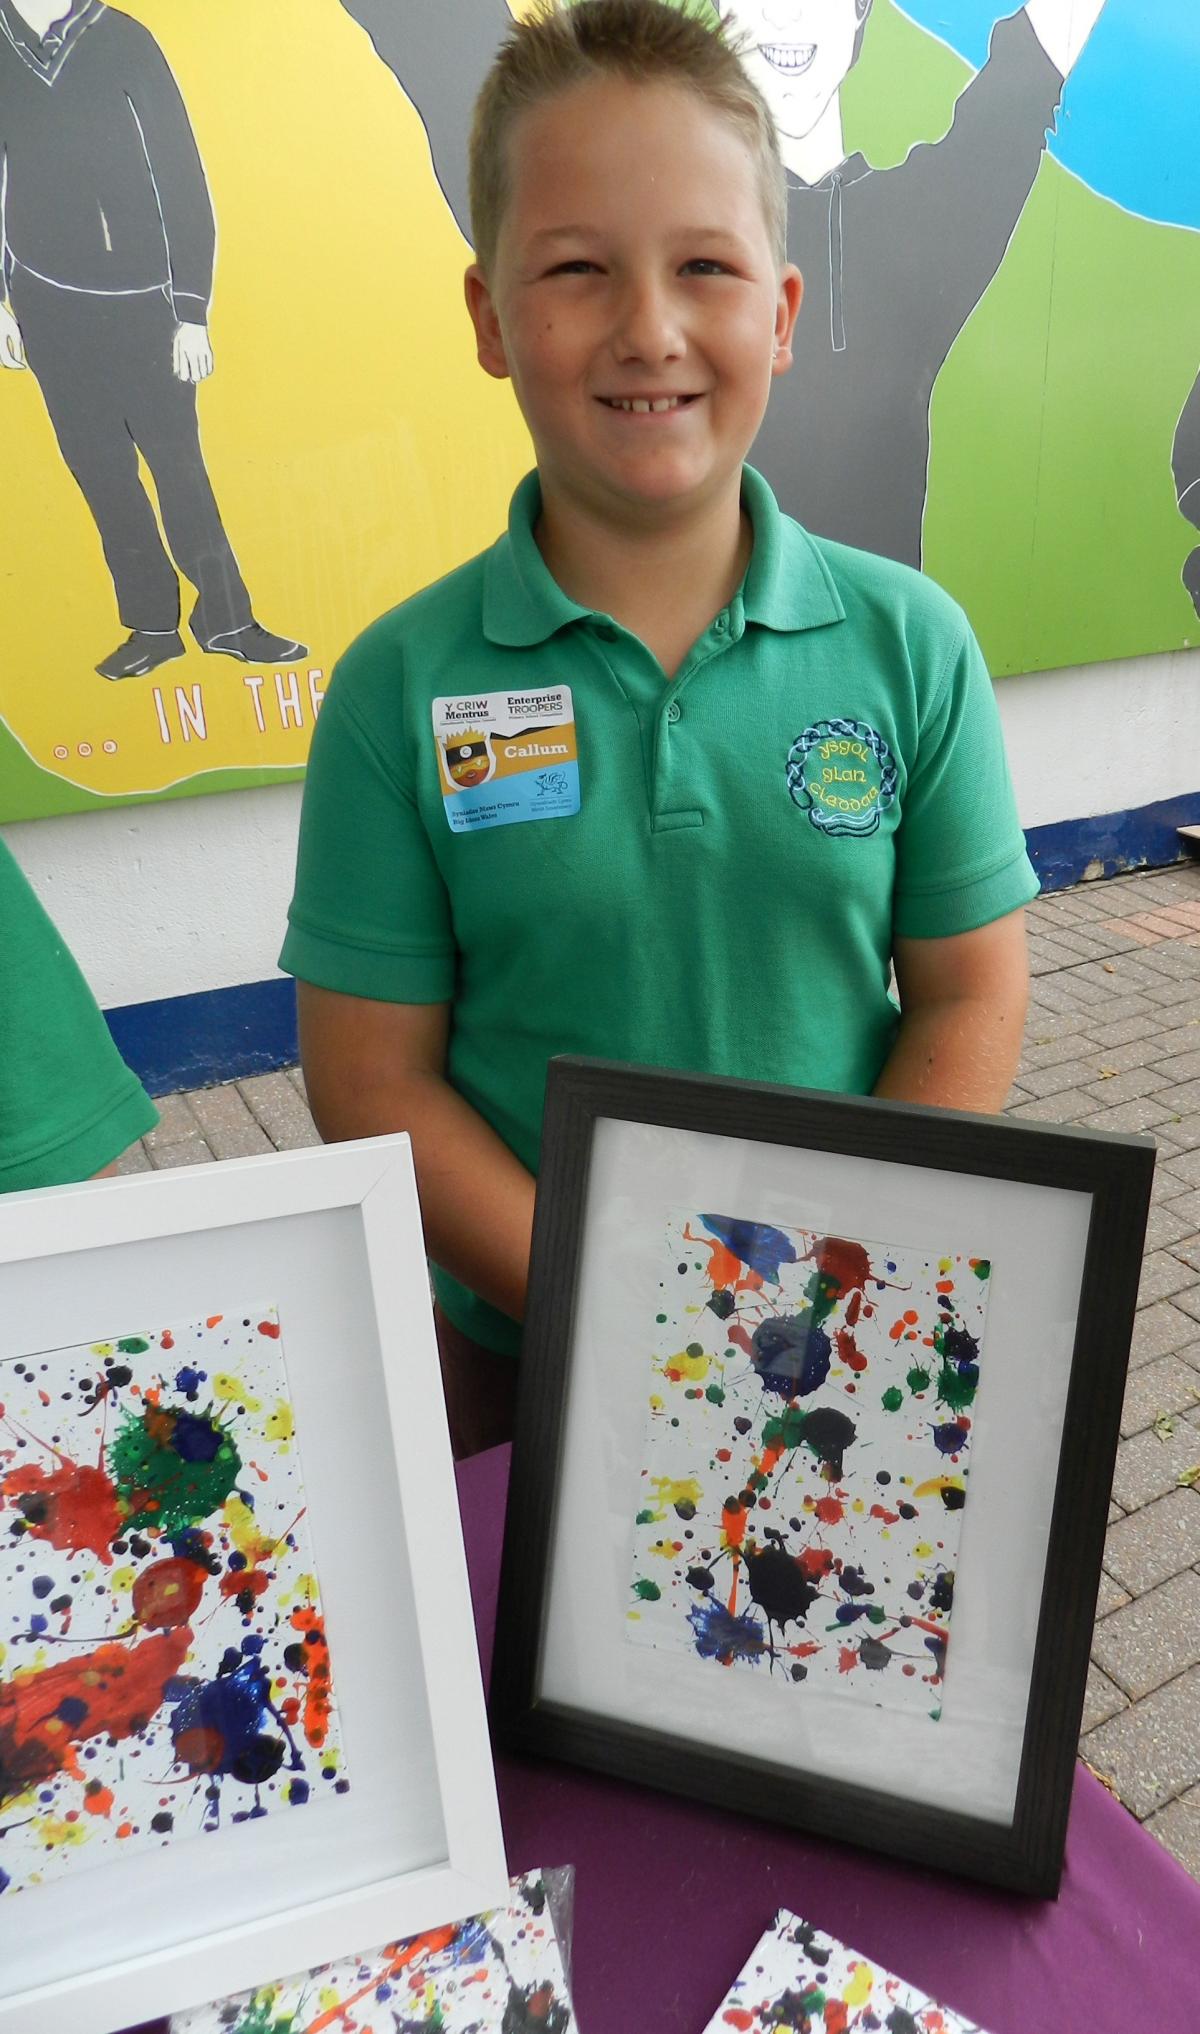 Ysgol Glan Cleddau were selling items made by youngsters throughout the school including colourful splash pictures from Year 3, bath salts from Year 5, cards with pictures taken by pupils in Year 4, and picture frames from Year 6.
